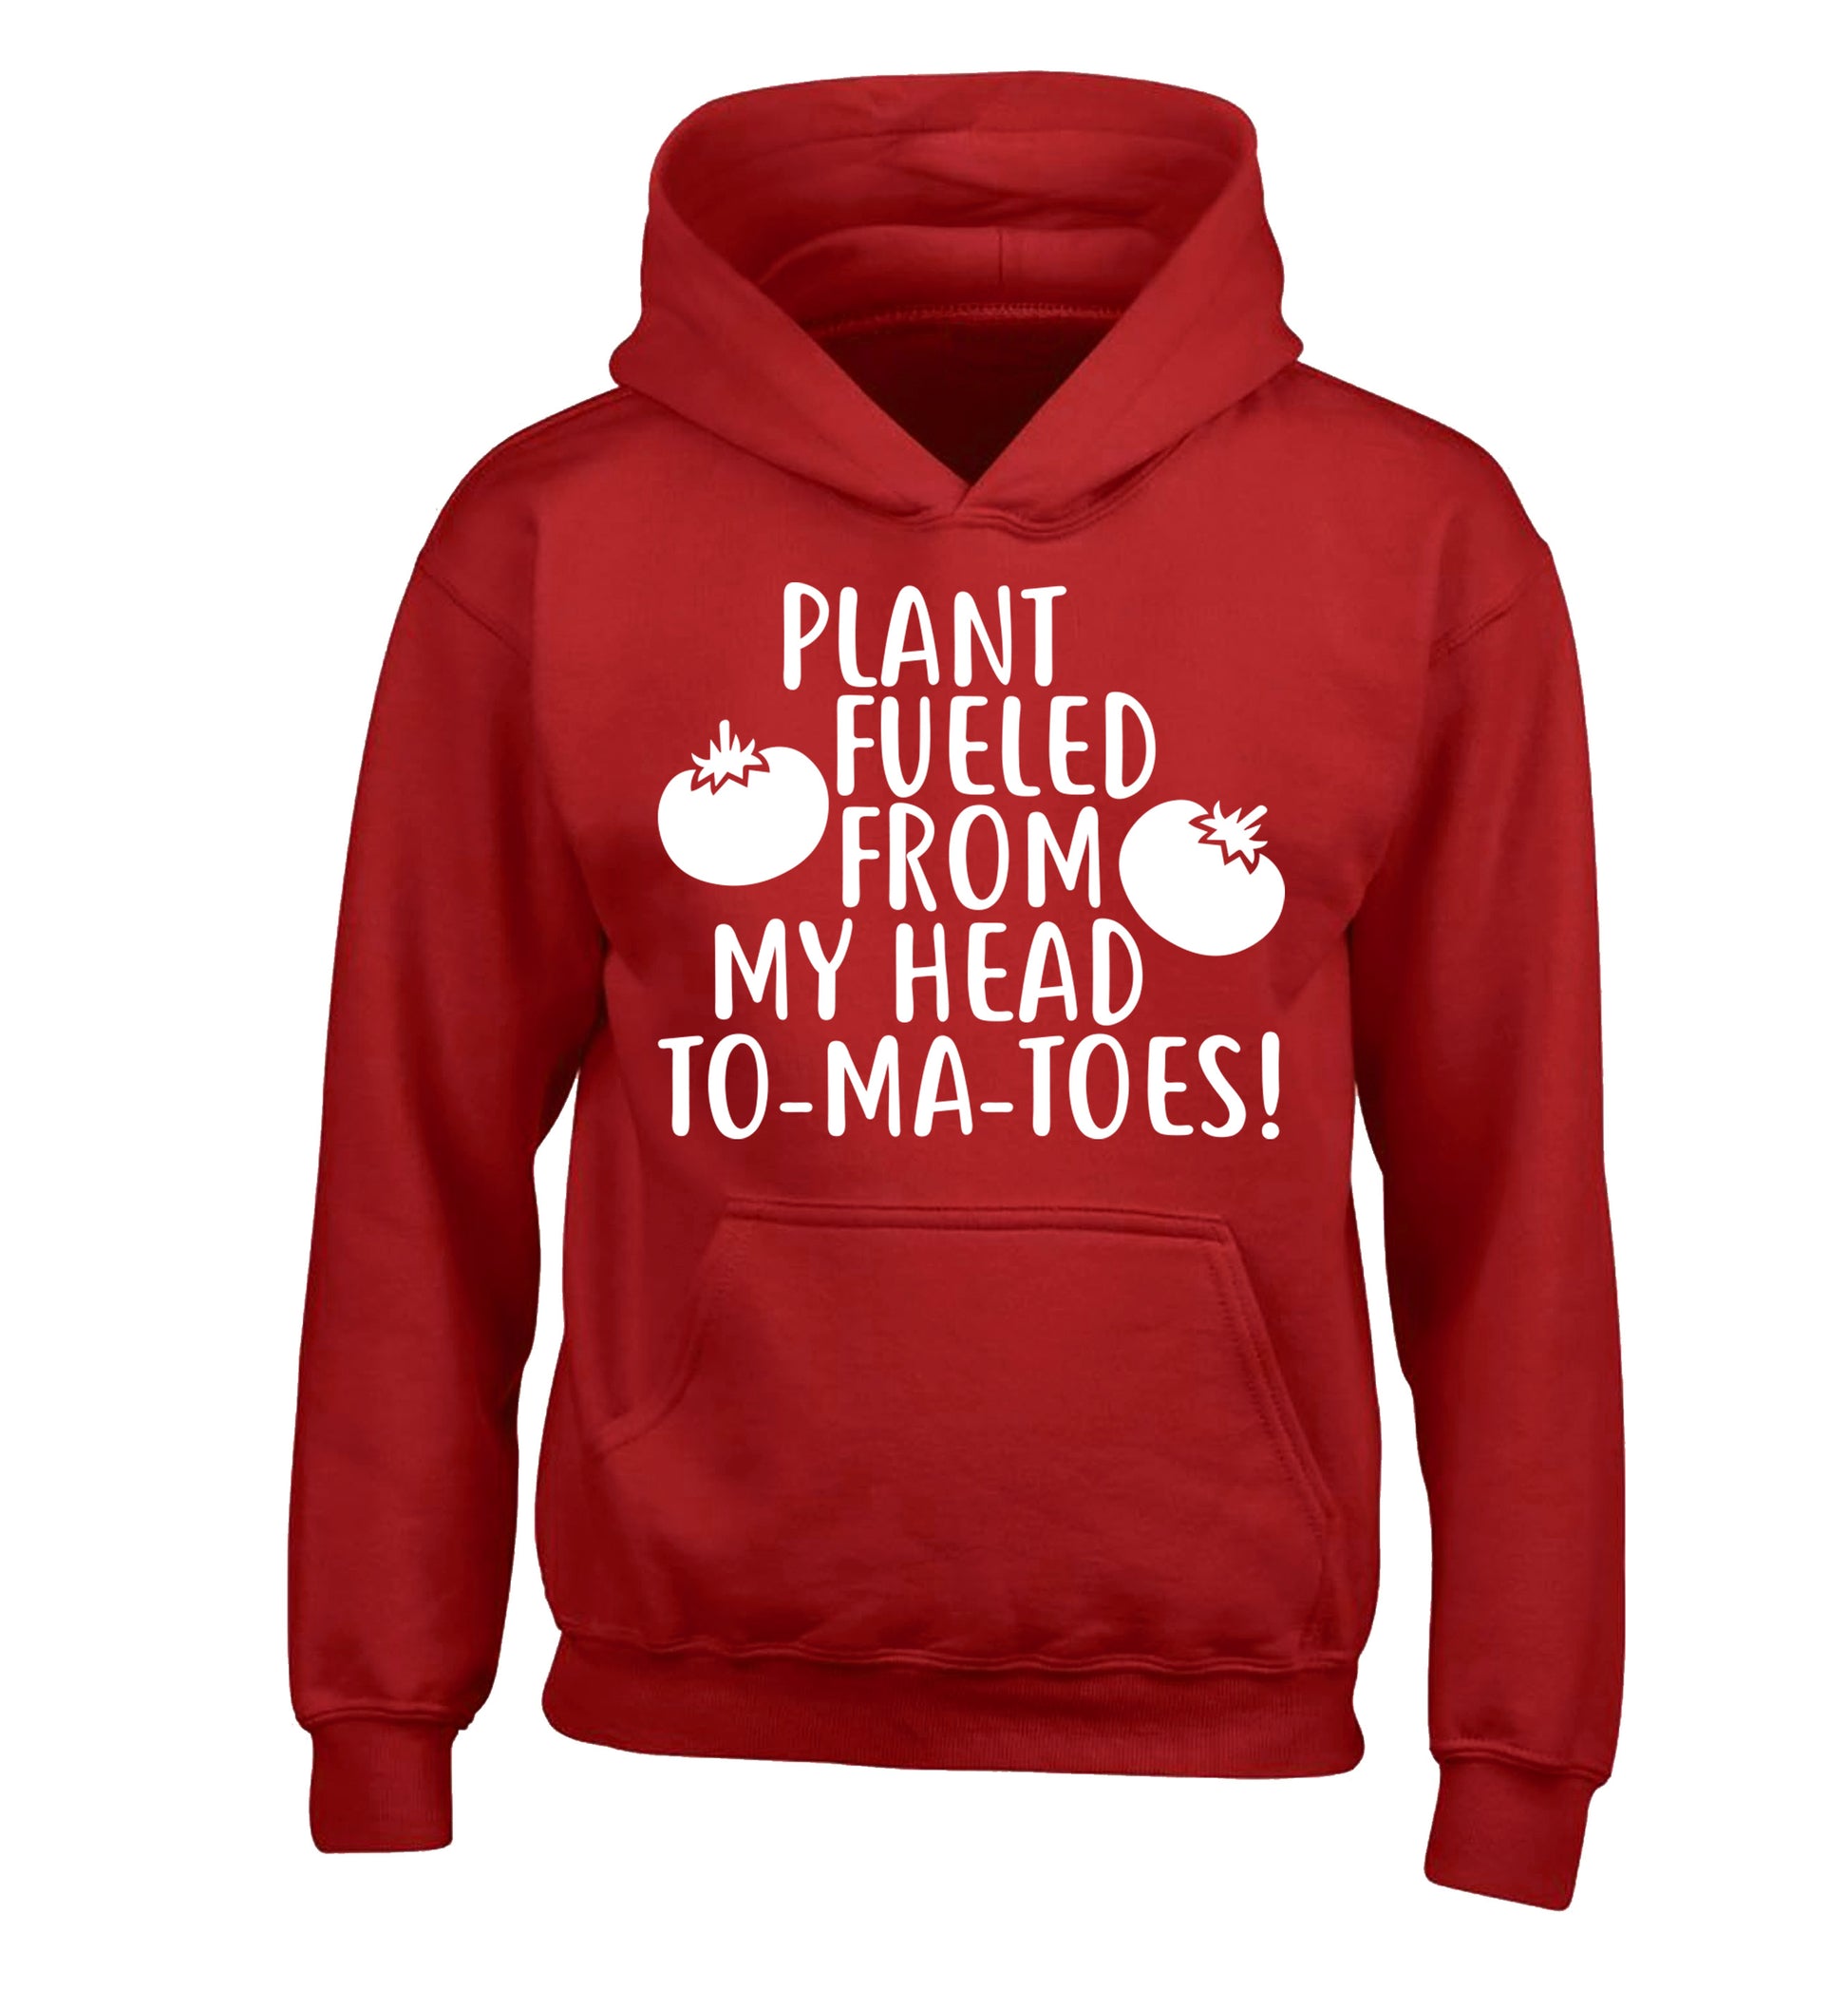 Plant fueled from my head to-ma-toes children's red hoodie 12-14 Years